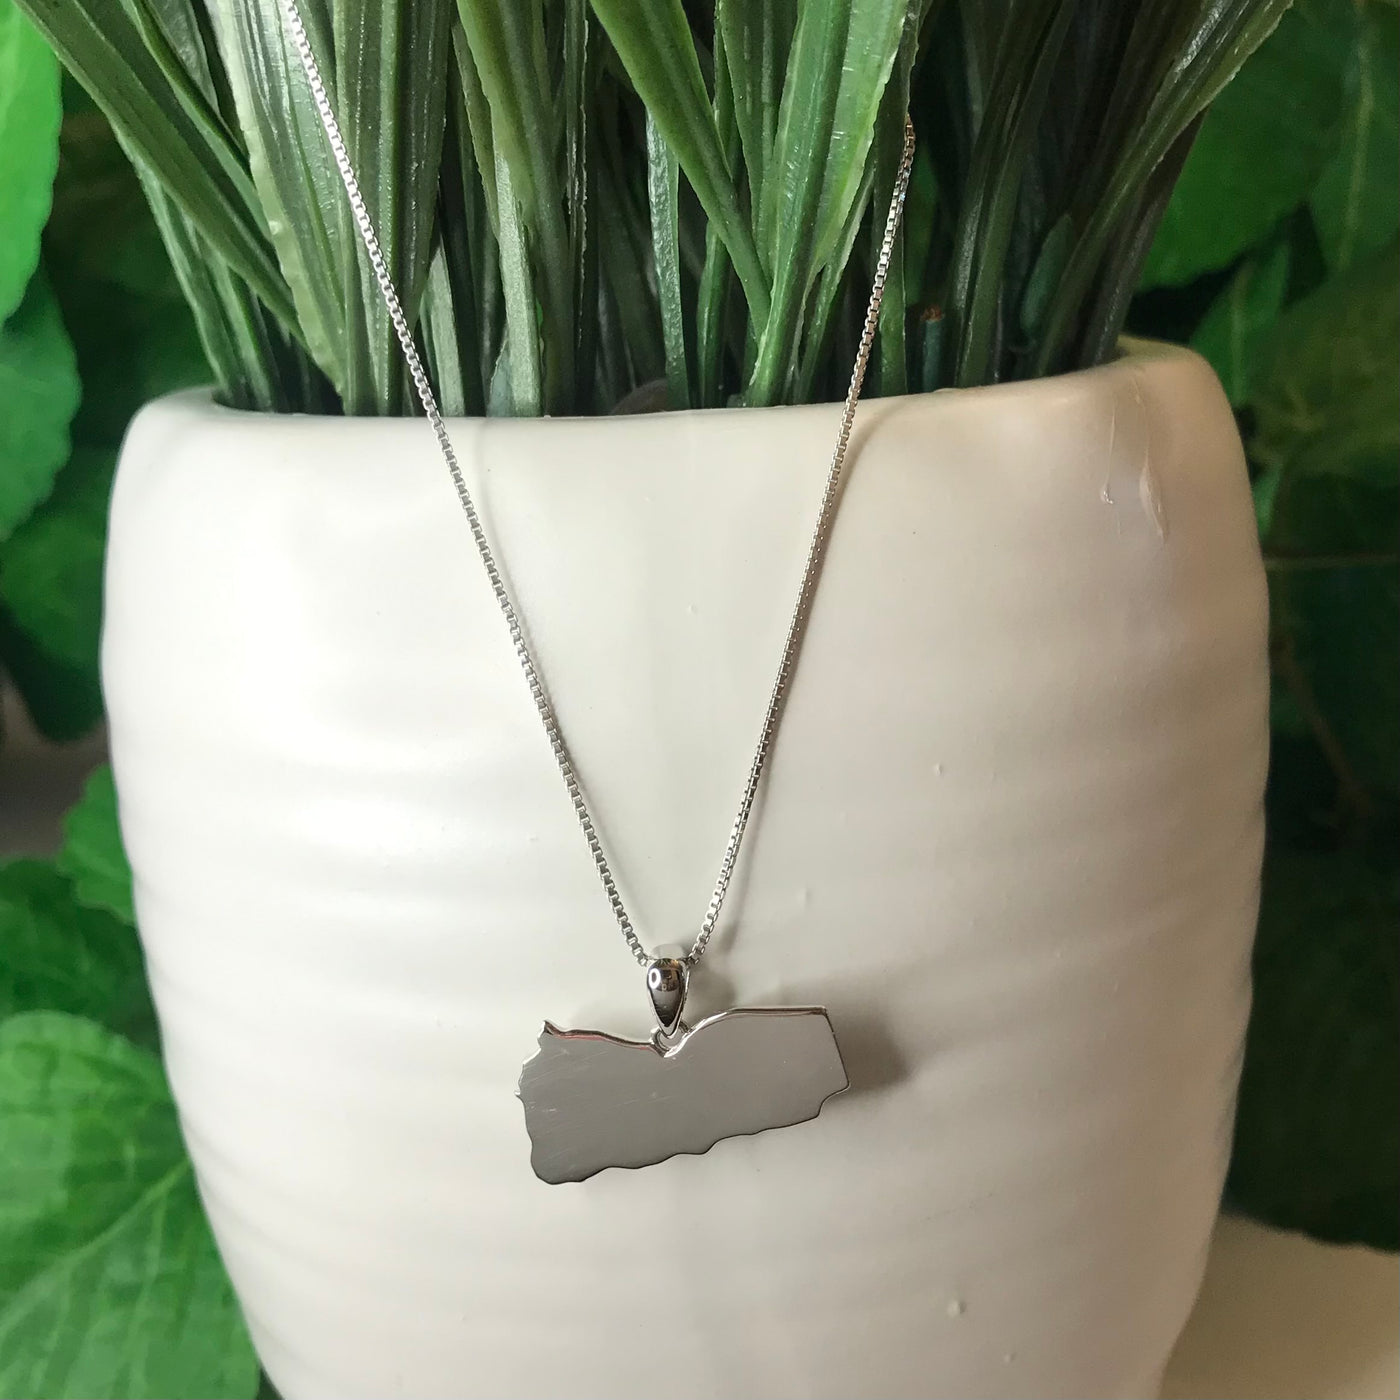 Sterling Silver Yemen Map Necklace - Available in 3 Colors